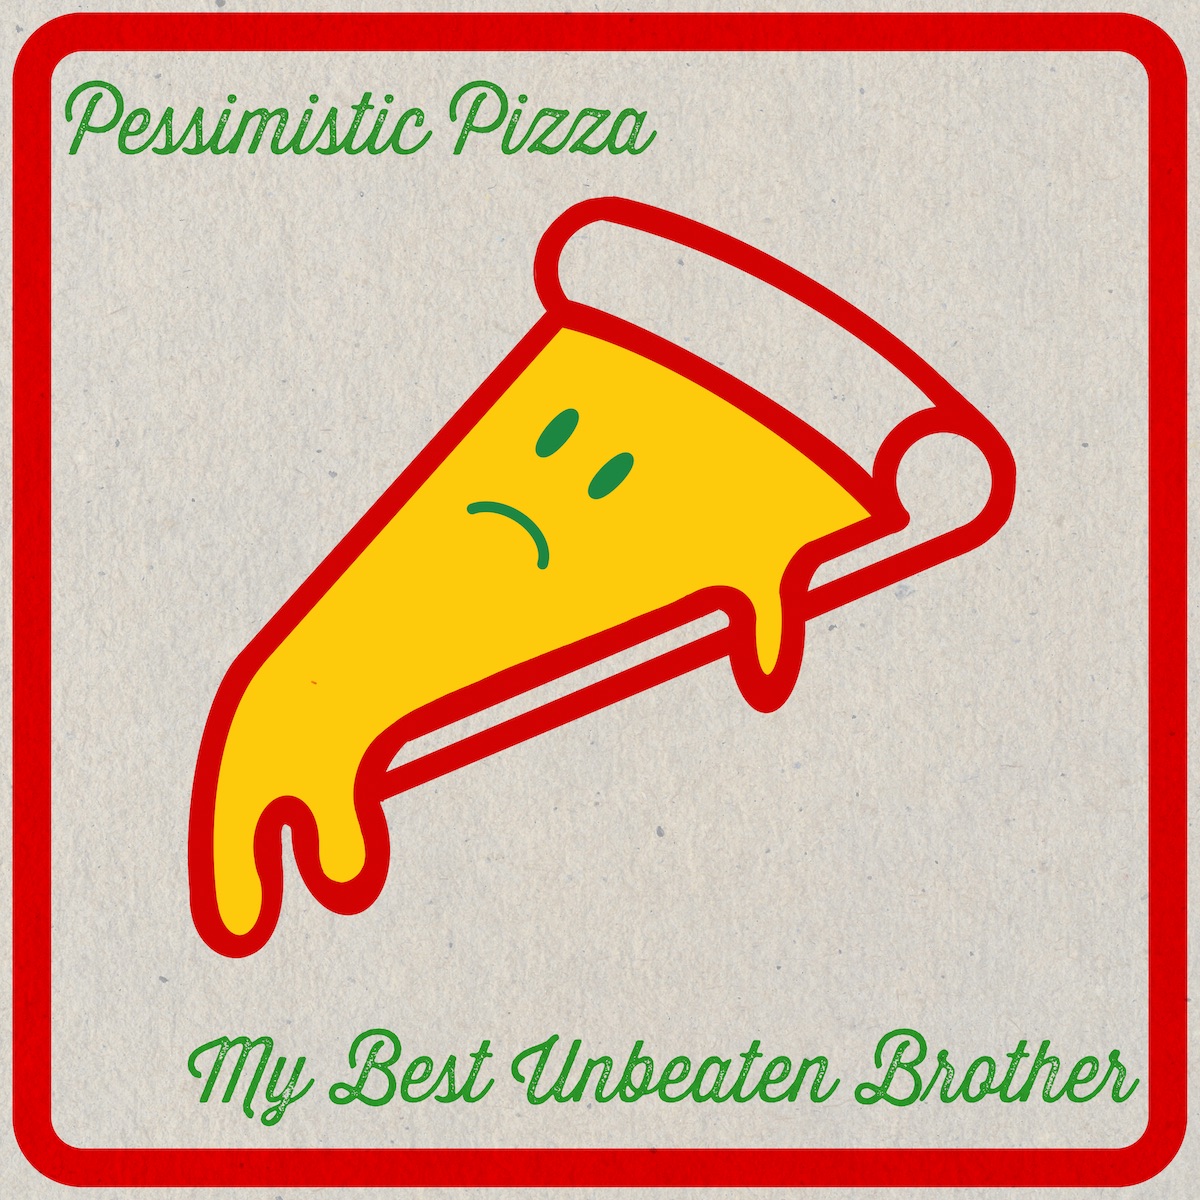 DEBUT ALBUM REVIEW: Pessimistic Pizza by My Best Unbeaten Brother